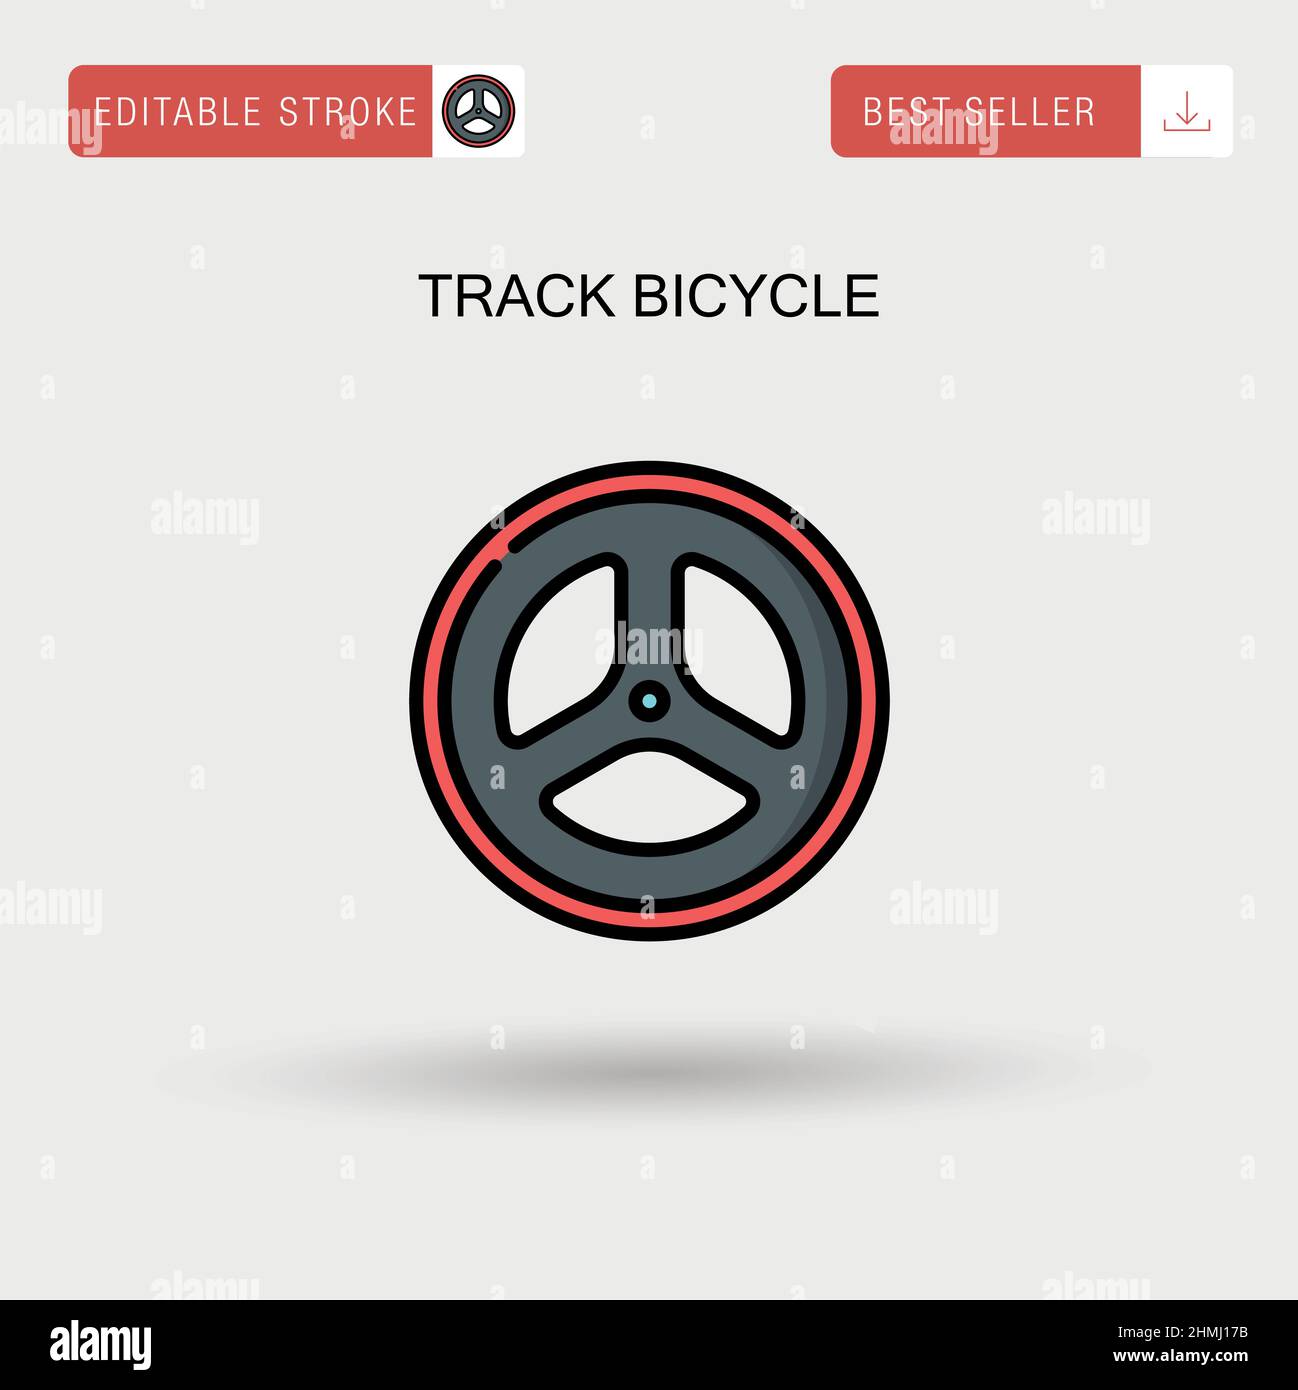 Track bicycle Simple vector icon. Stock Vector